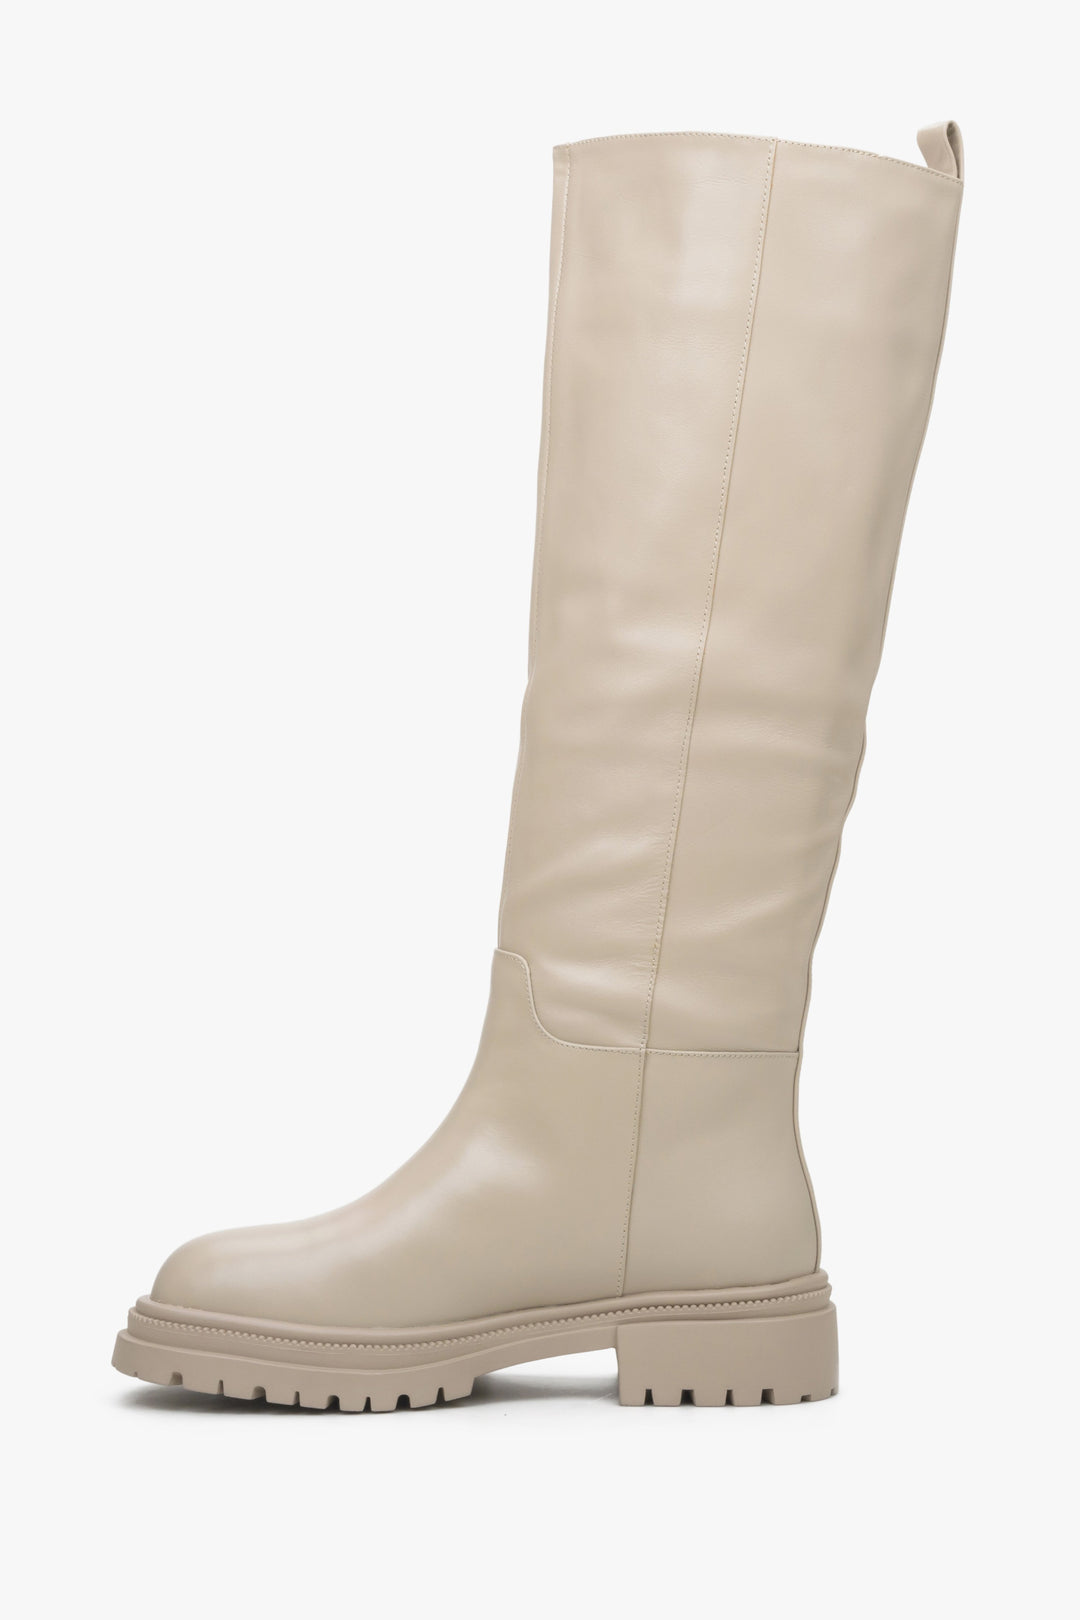 Women's light beige boots made of genuine leather by Estro - shoe profile.